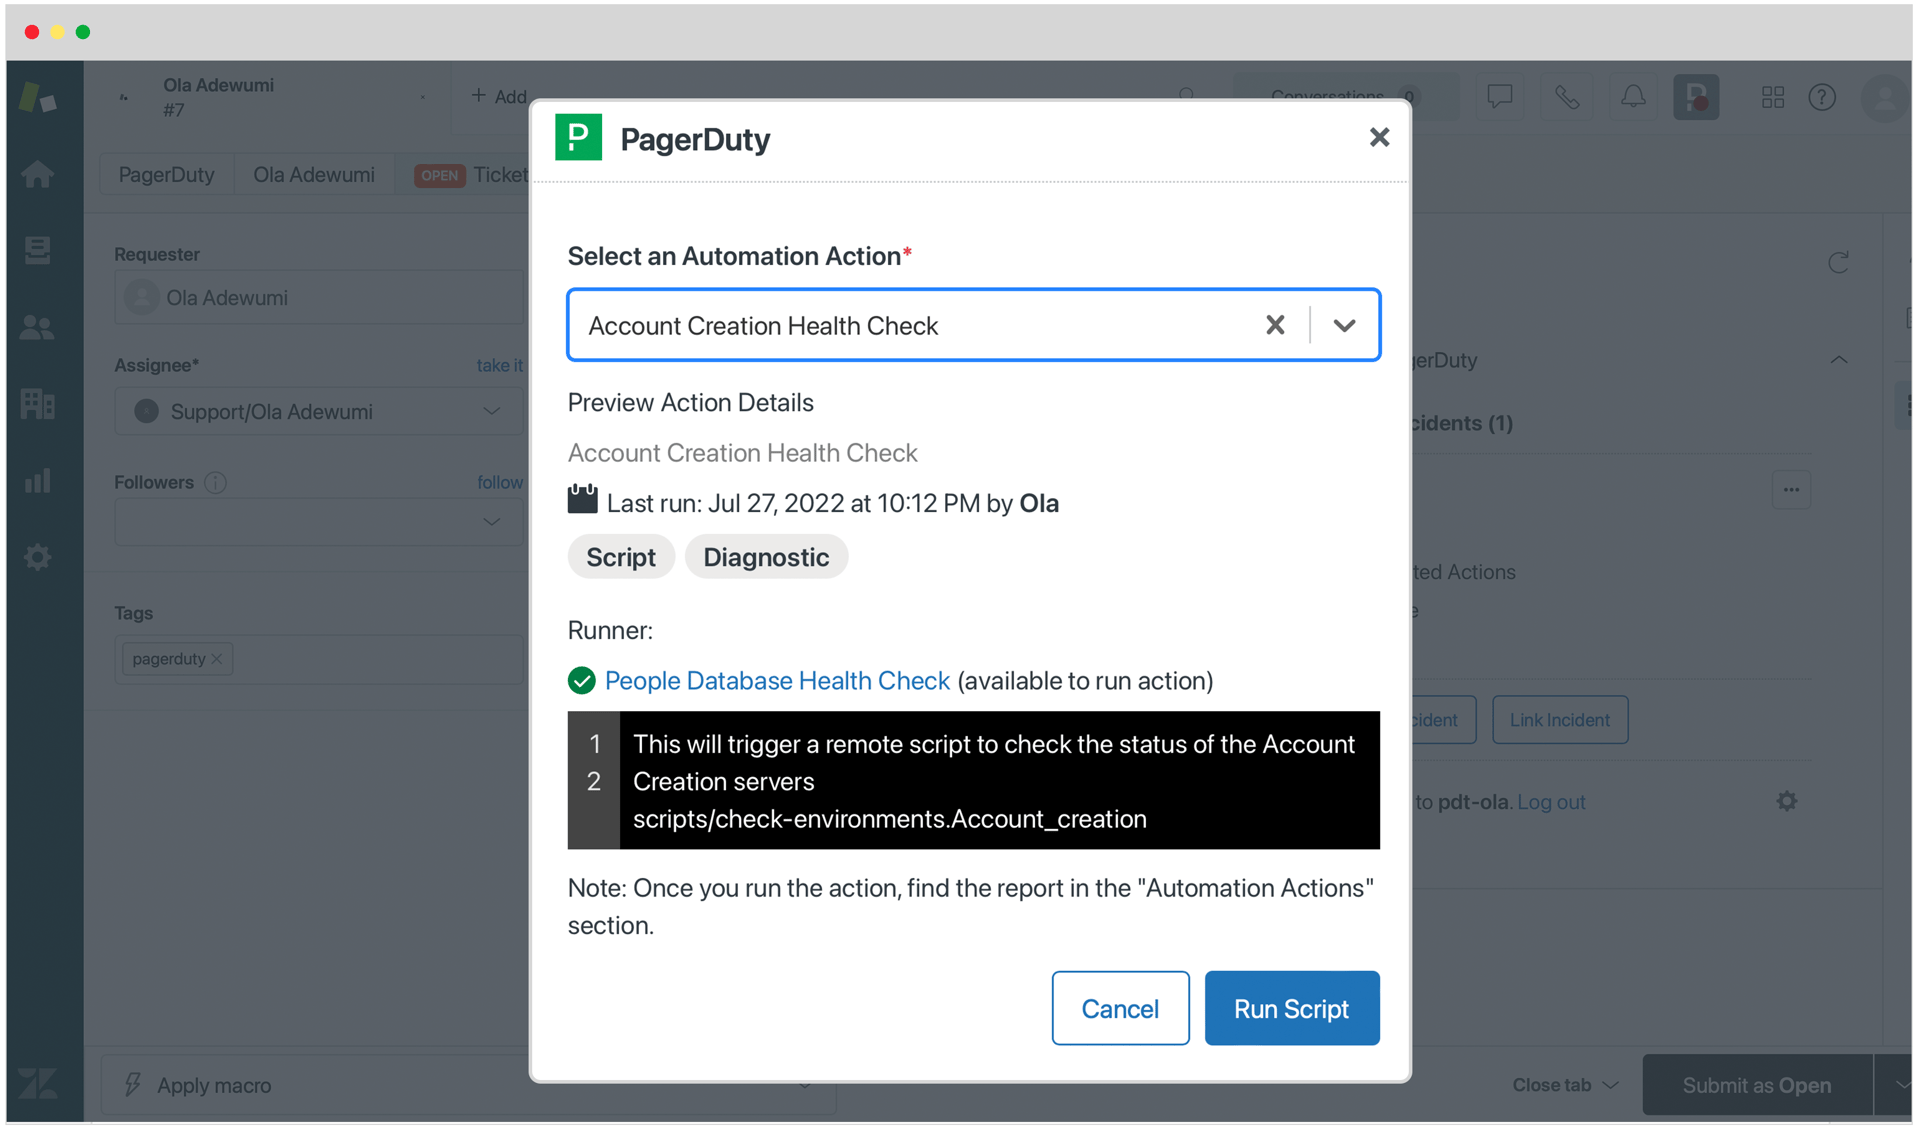 What's New in PagerDuty : PagerDuty App for Zendesk